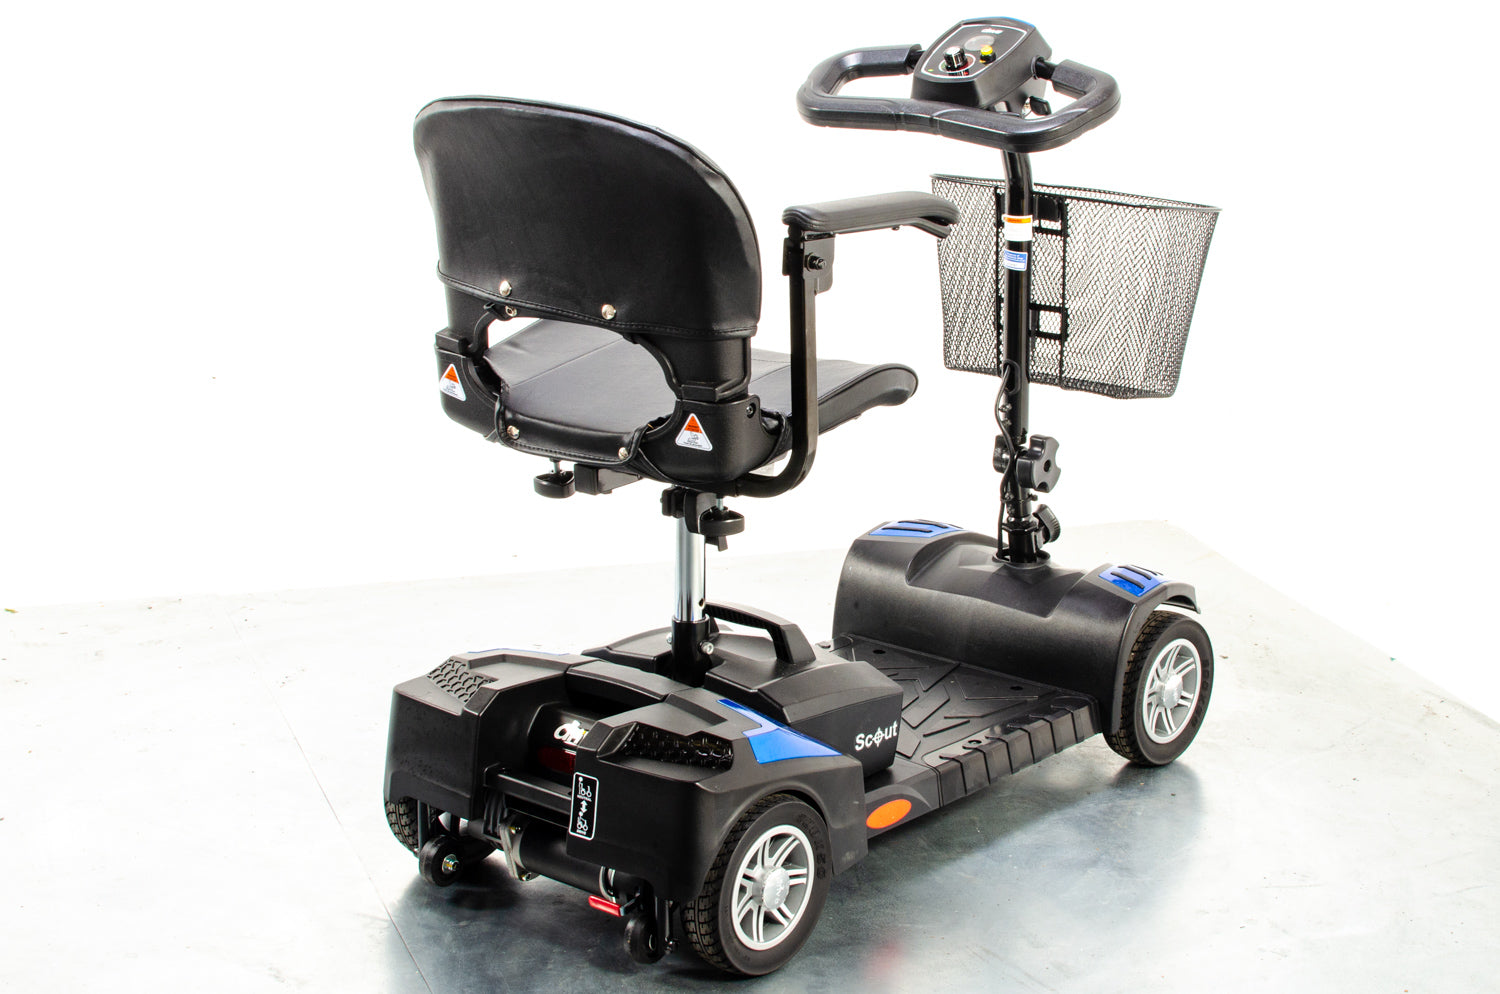 Drive Scout Used Mobility Scooter Small Transportable Boot Lightweight 4mph